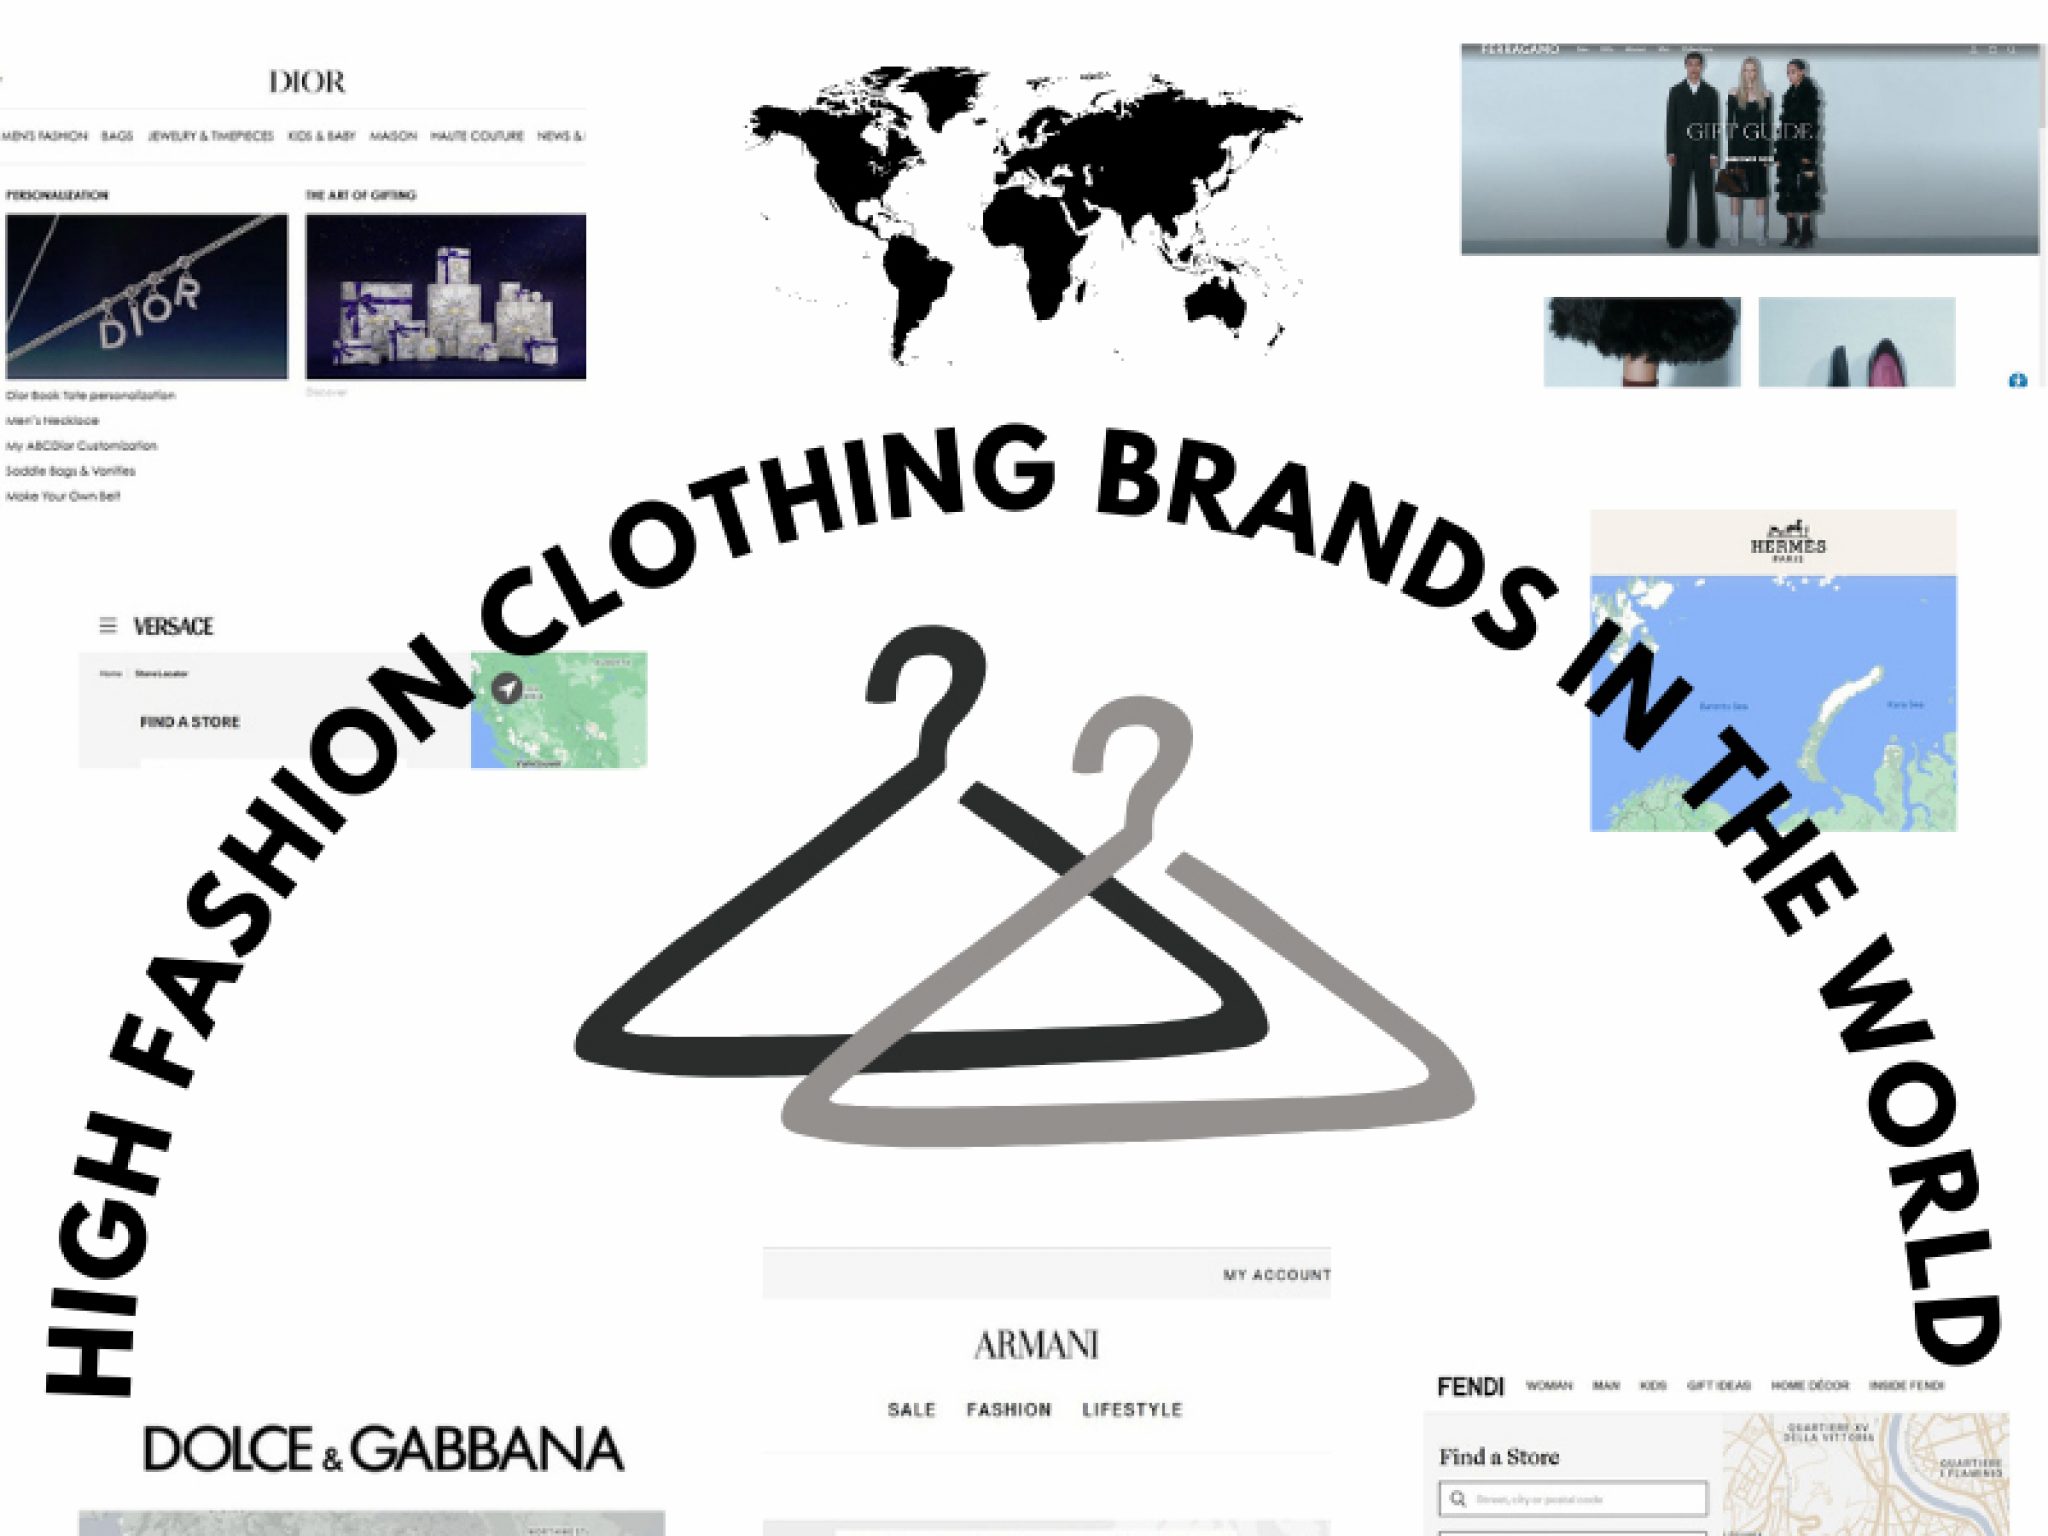 High Fashion Clothing Brands In The World 2048x1536 